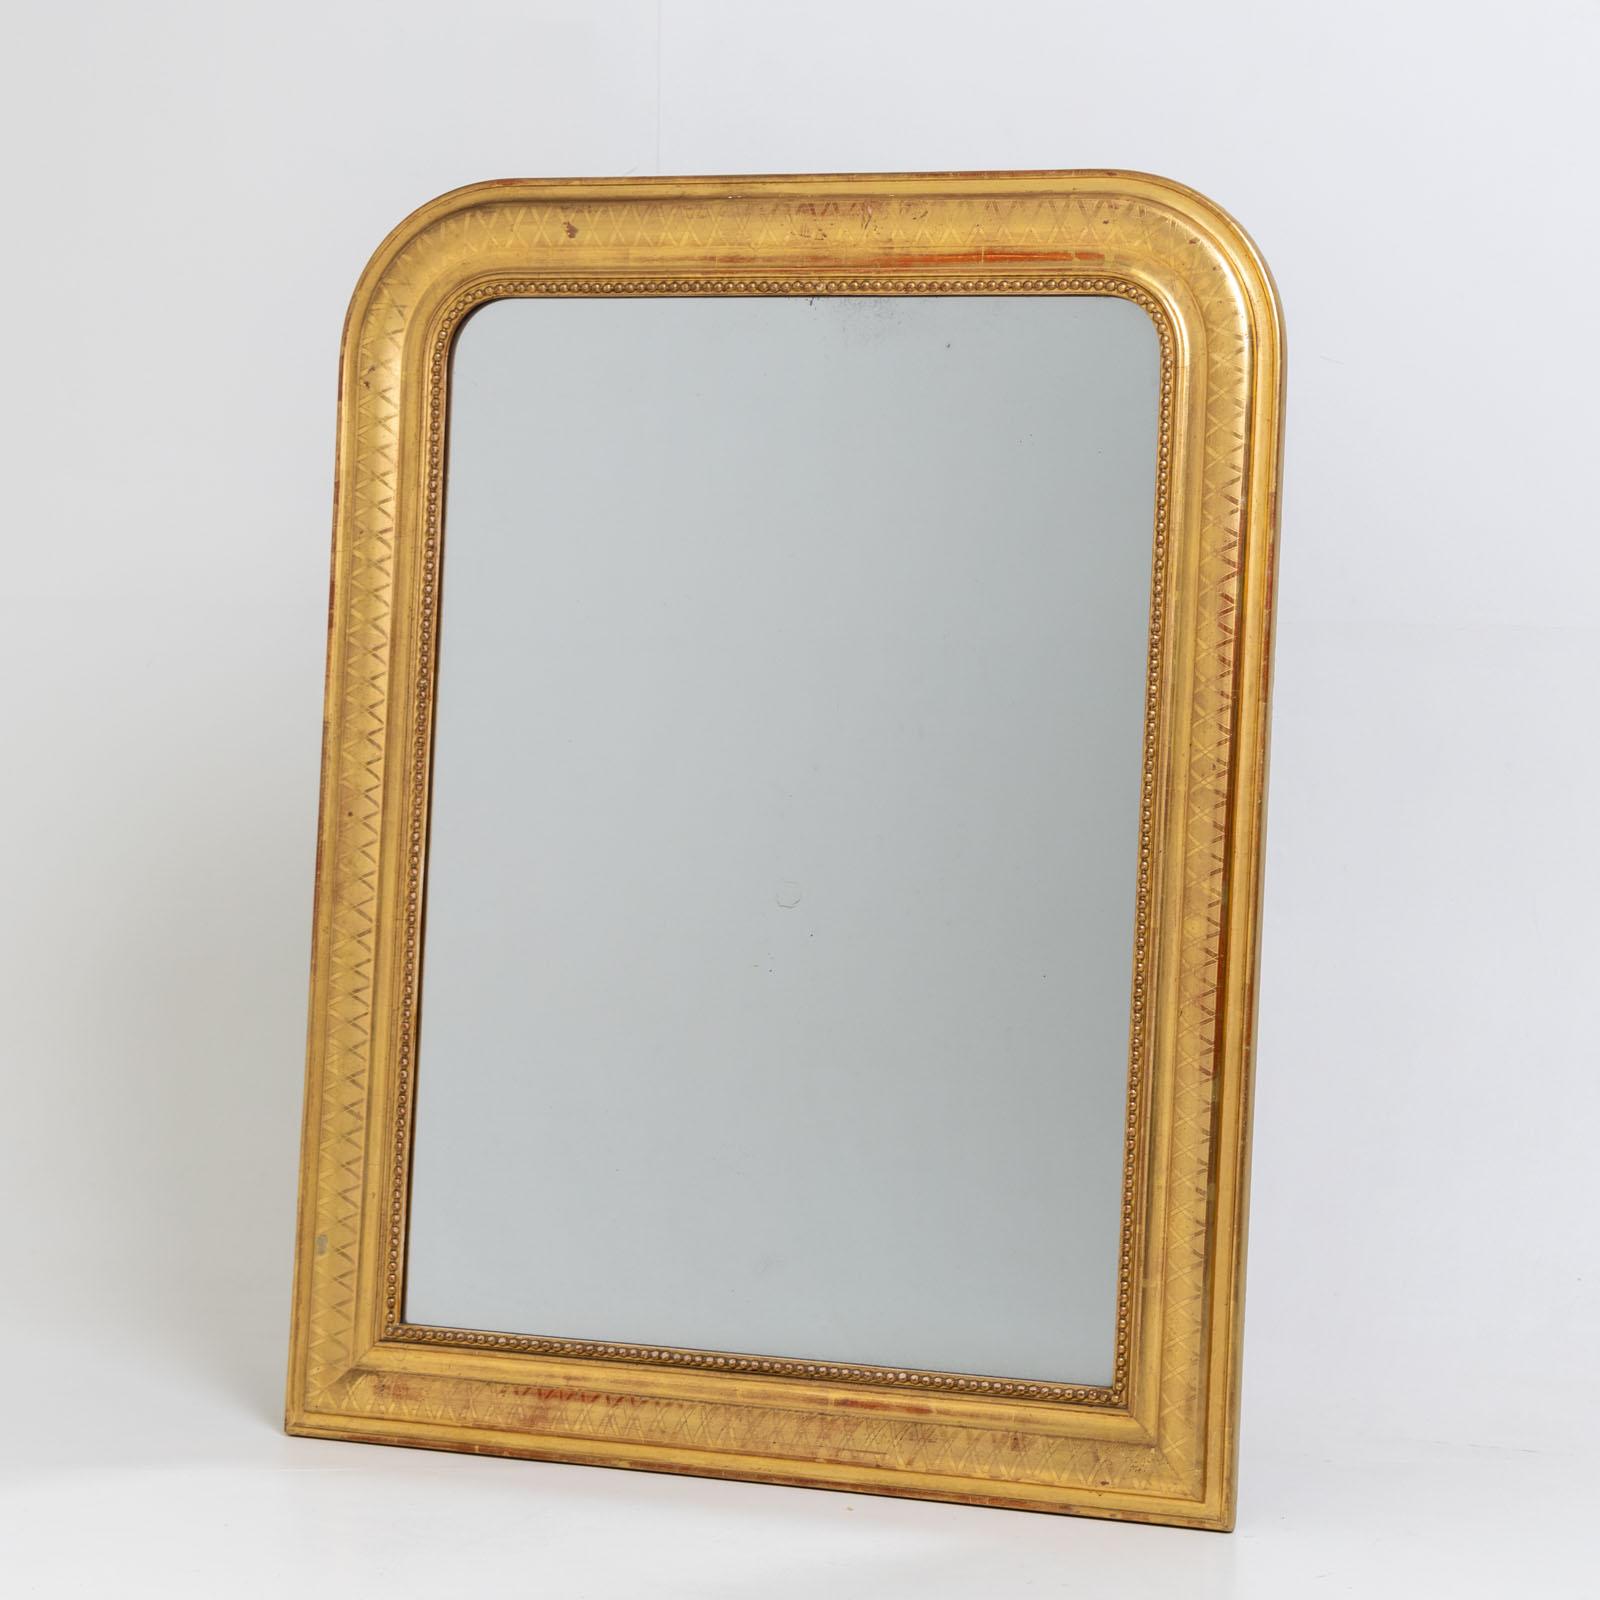 Large gold-patinated Louis Philippe wall mirror with rounded frame and beadwork. The outer groove is decorated with a diamond pattern. The red bolus shines through in places.